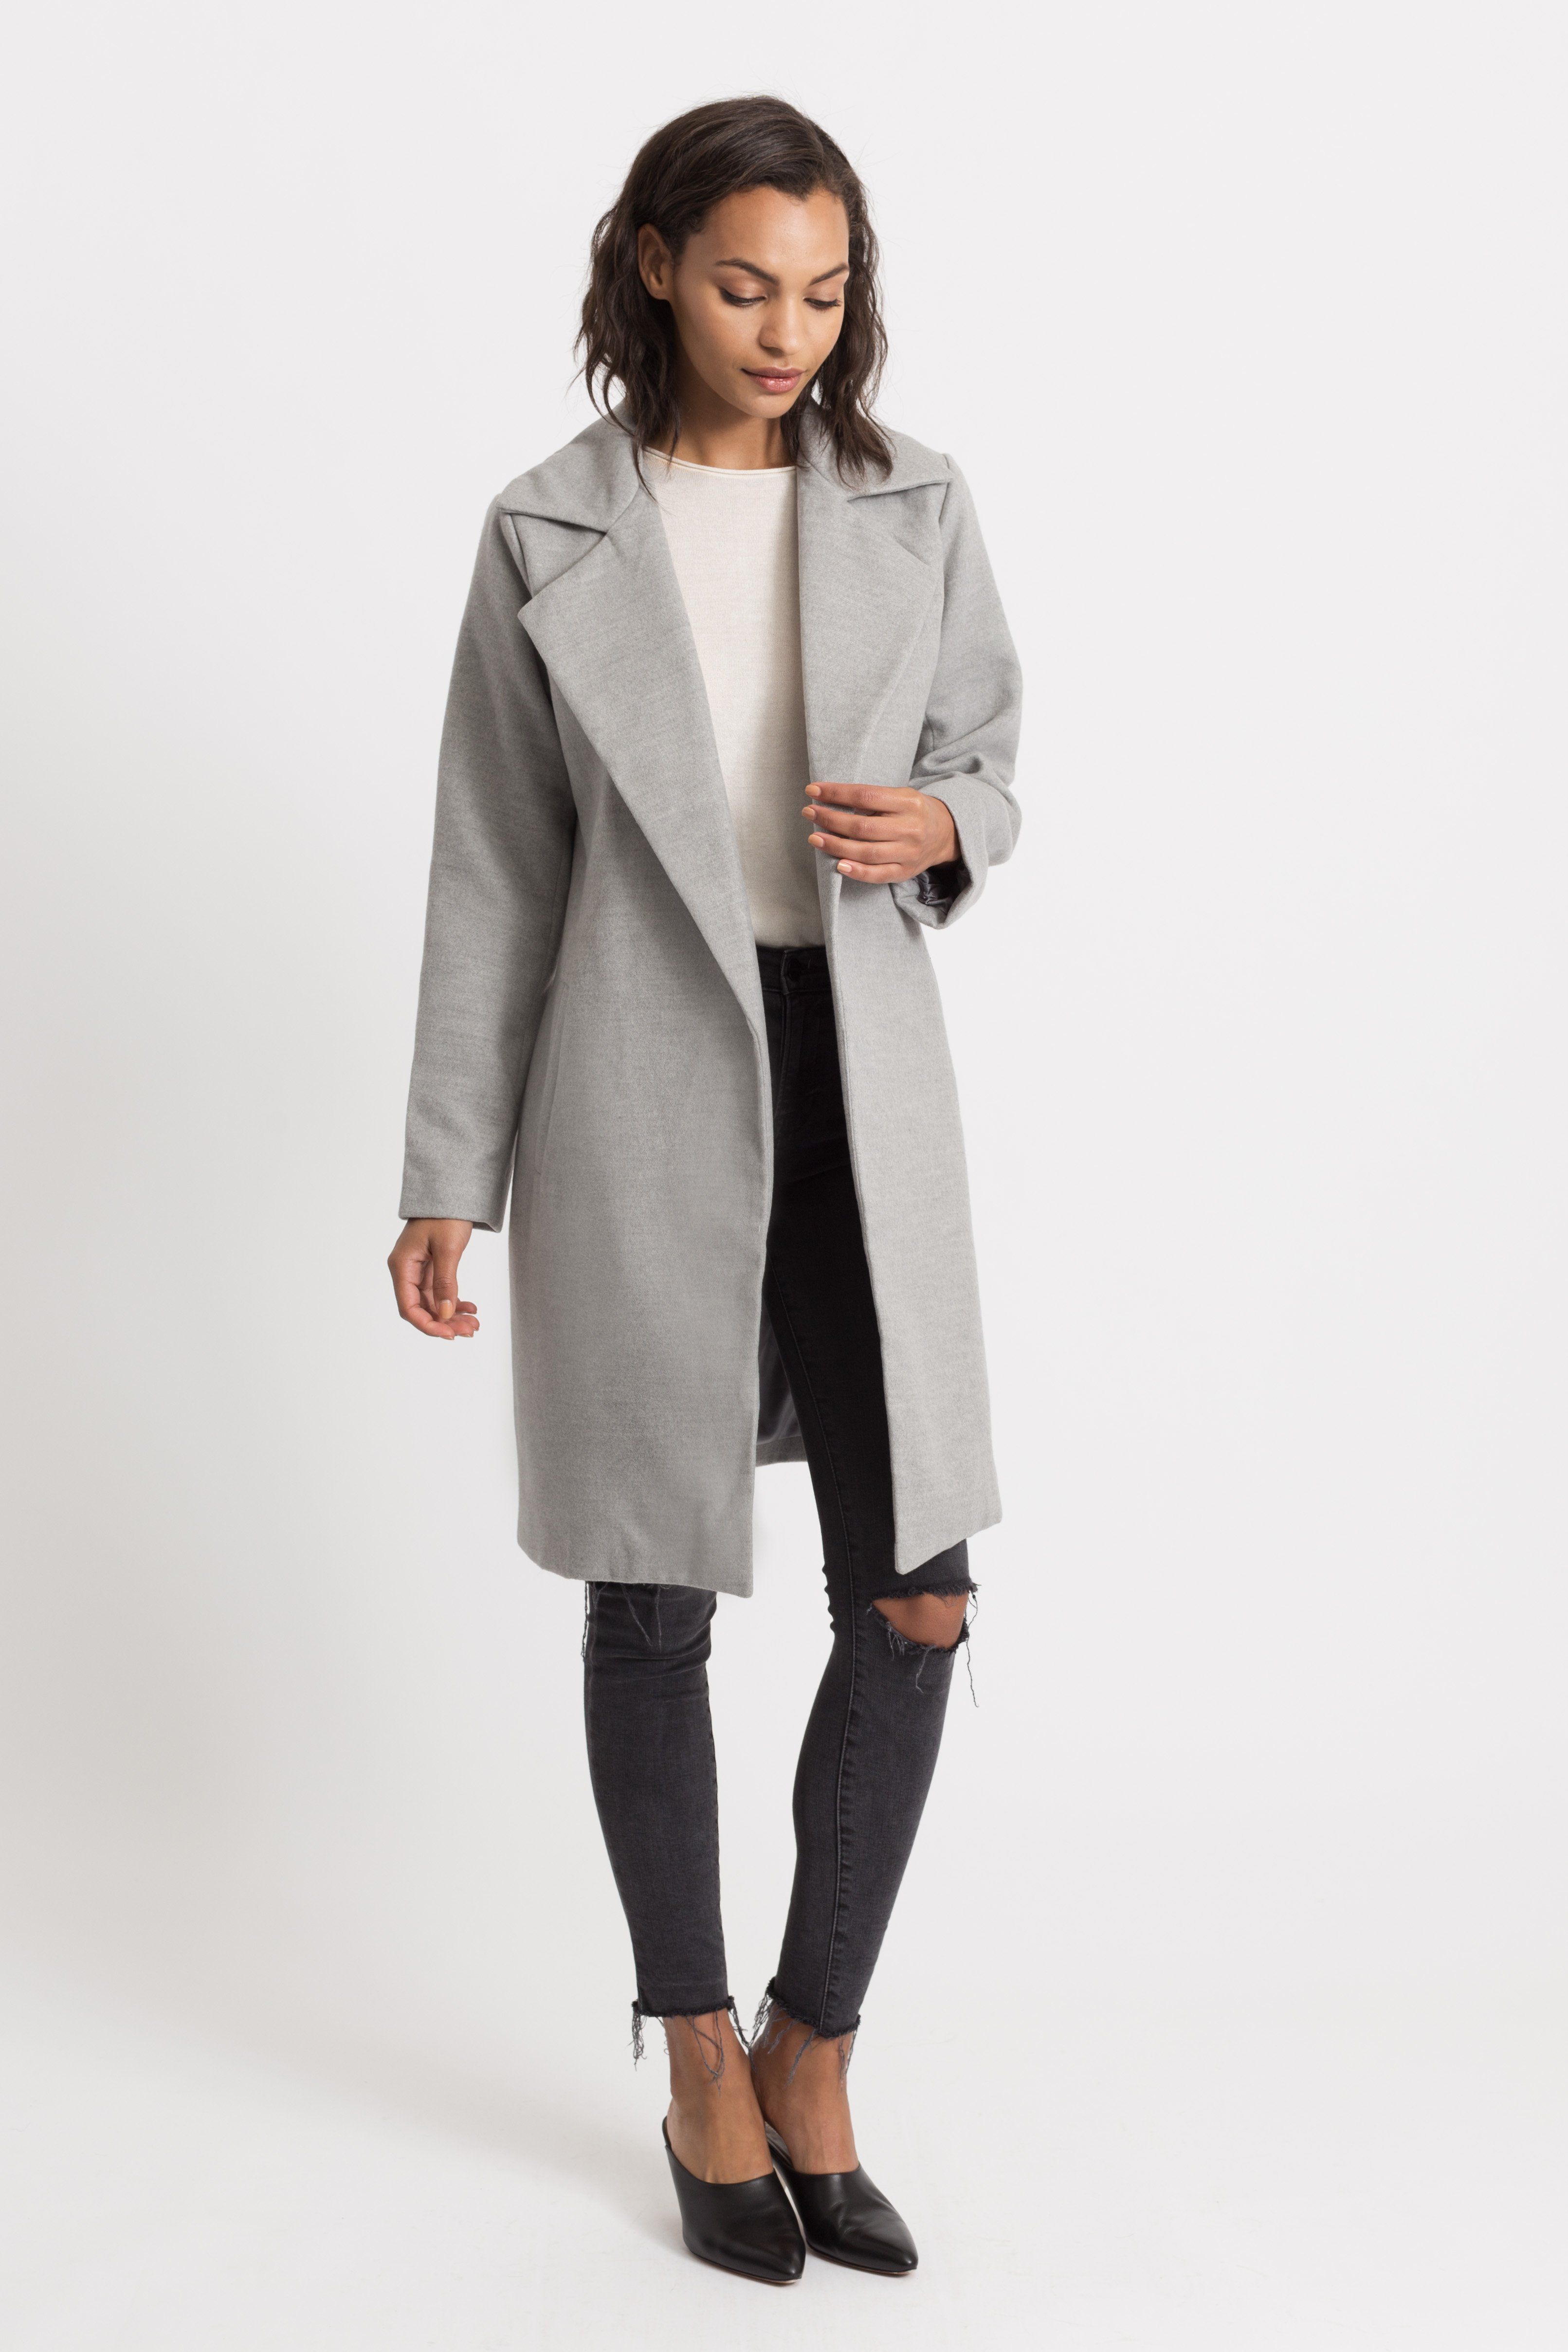 Cute Under $150 Coats Do Exist! | Oye! Times